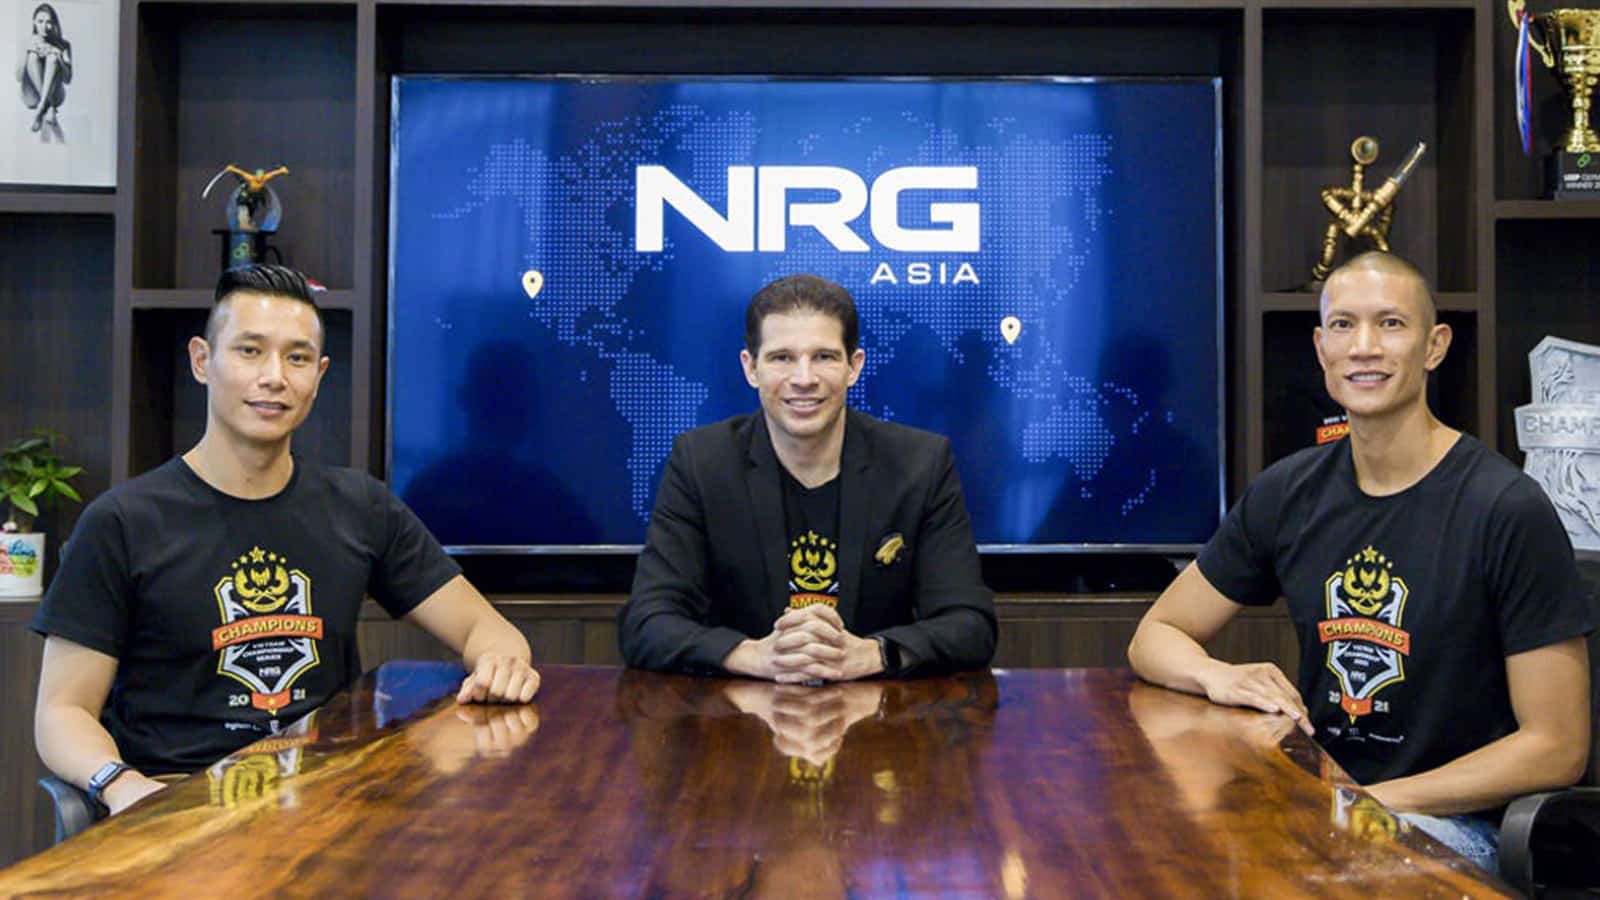 NRG Asia Launched